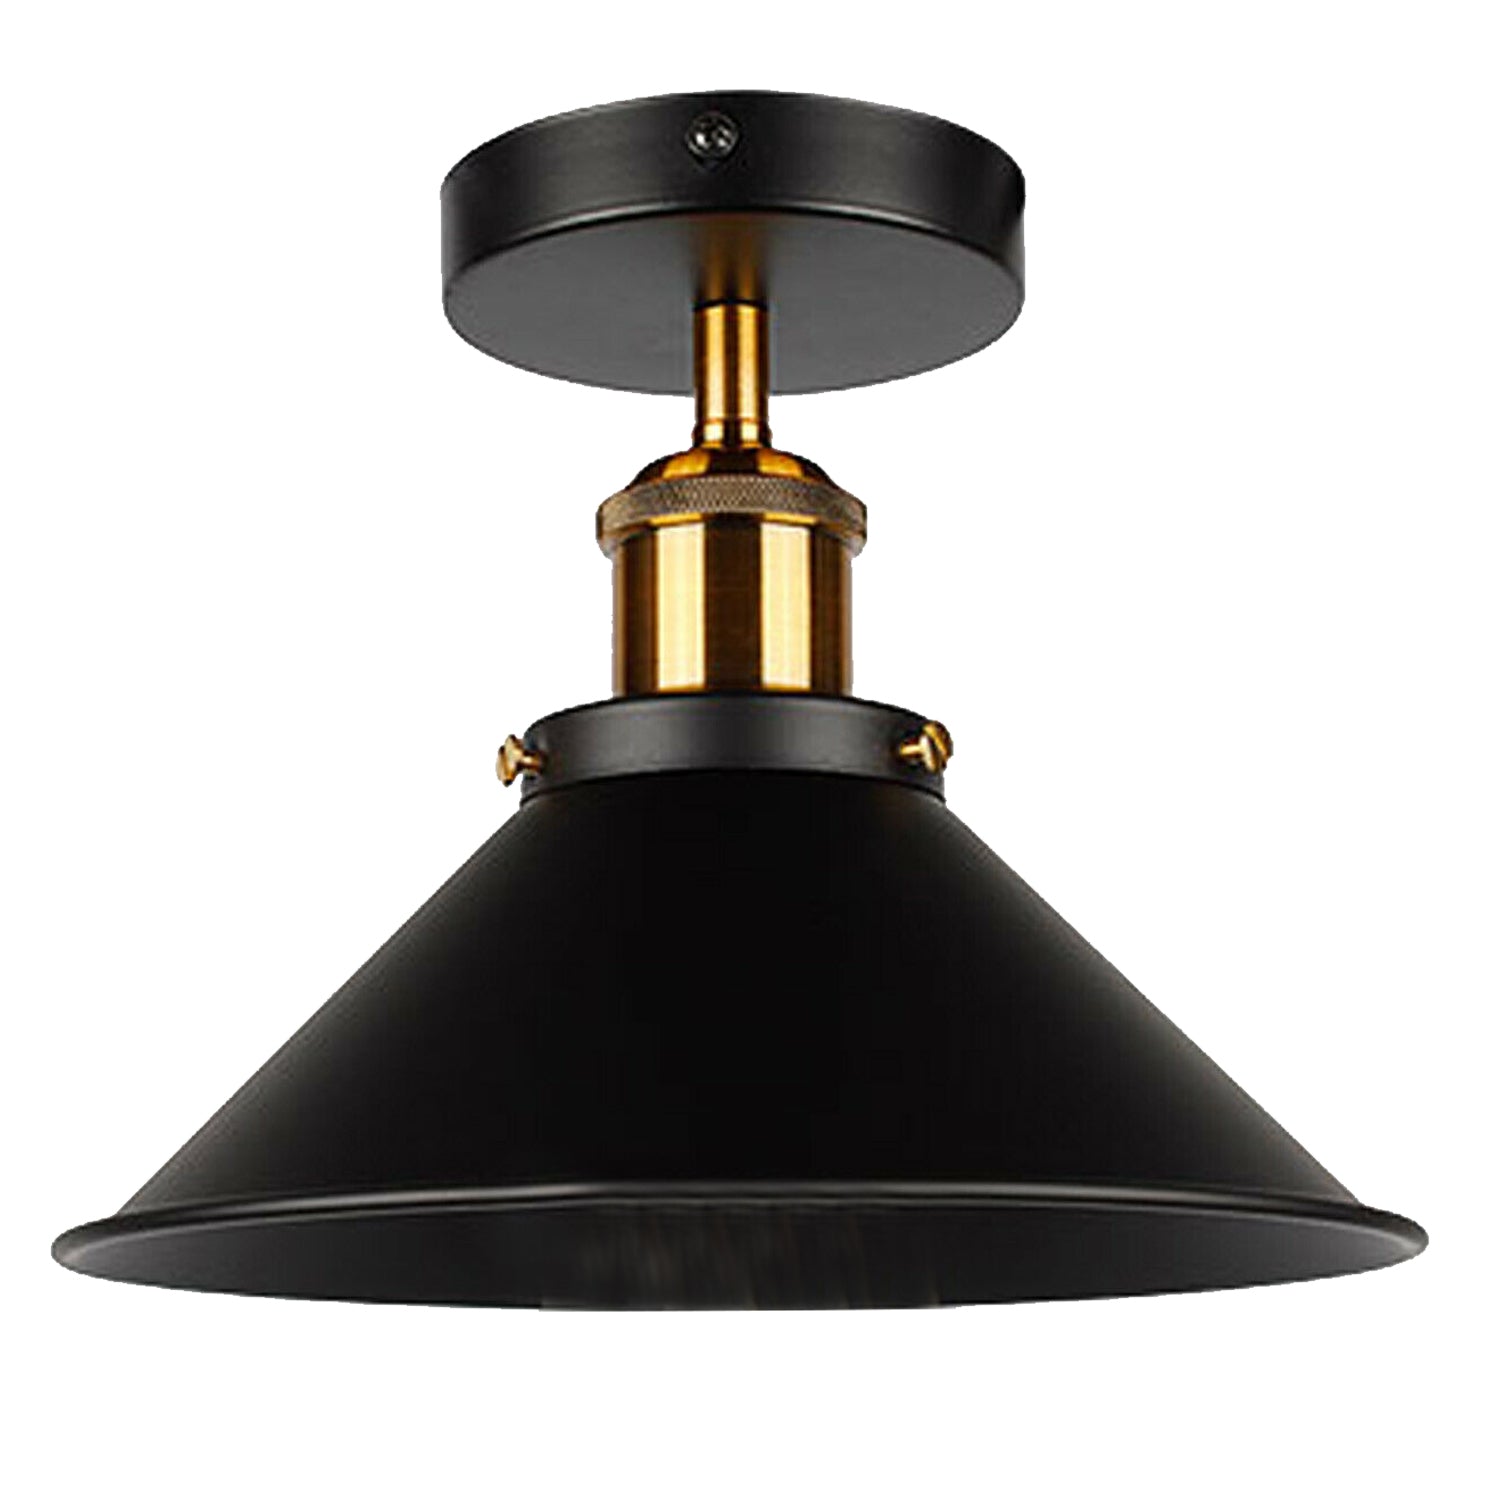 Style Ceiling Light Fittings Metal Flush Mount Shade